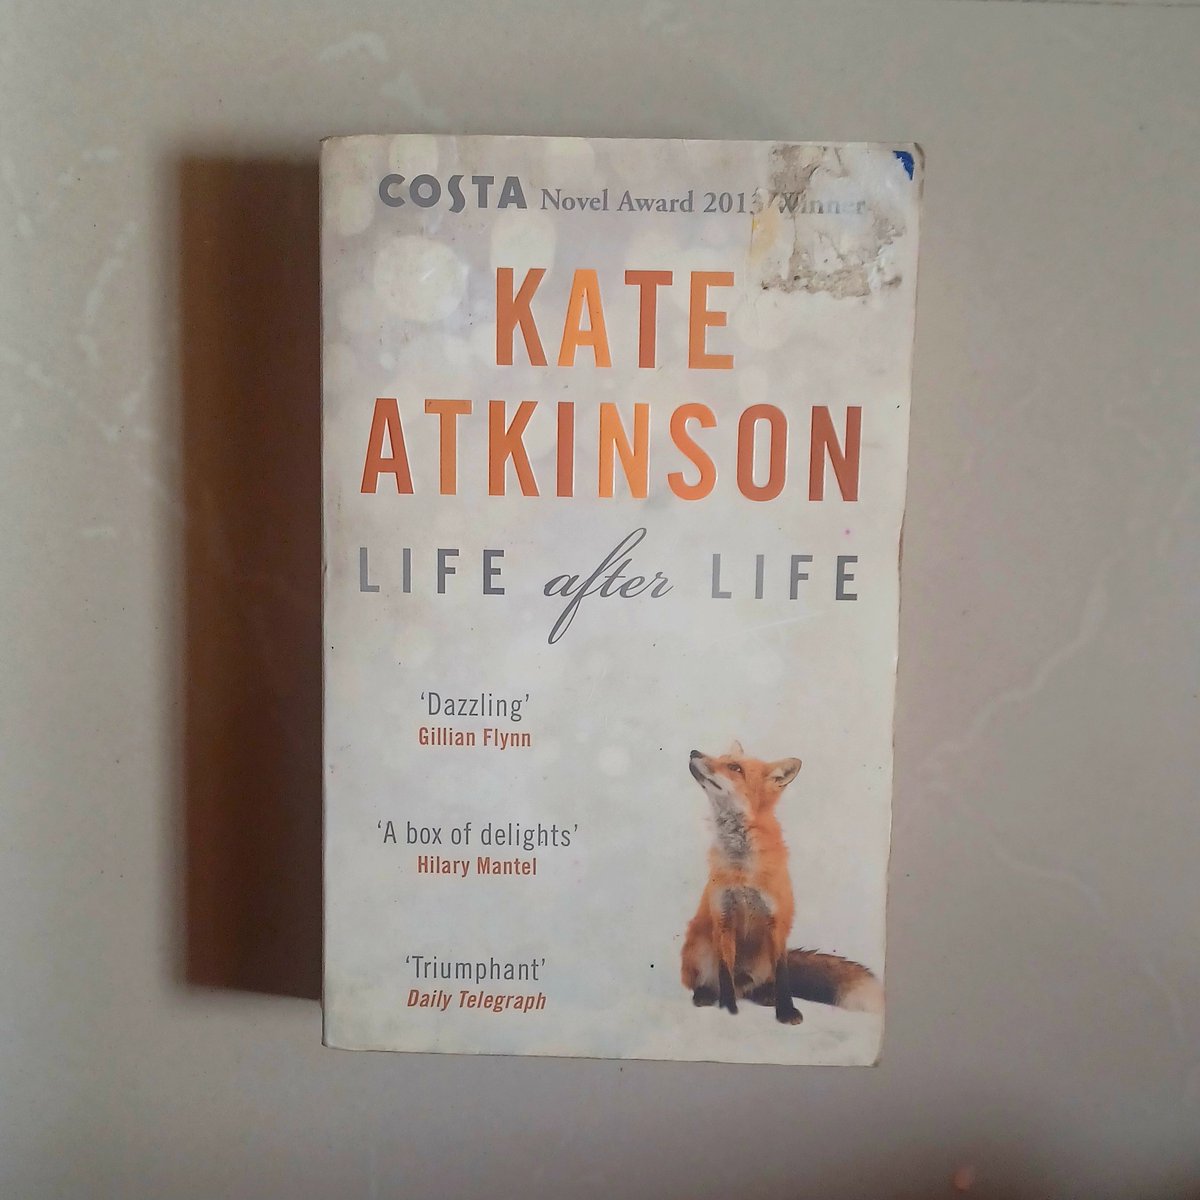 #Books2024 thread - 🧵

1. Life After Life by Kate Atkinson

Novel attempt. But what started as a brilliant tale of a woman caught in a time loop of dying and being born again ended up as an underwhelming, overlong narrative making me just skim through the last 160+ pages.